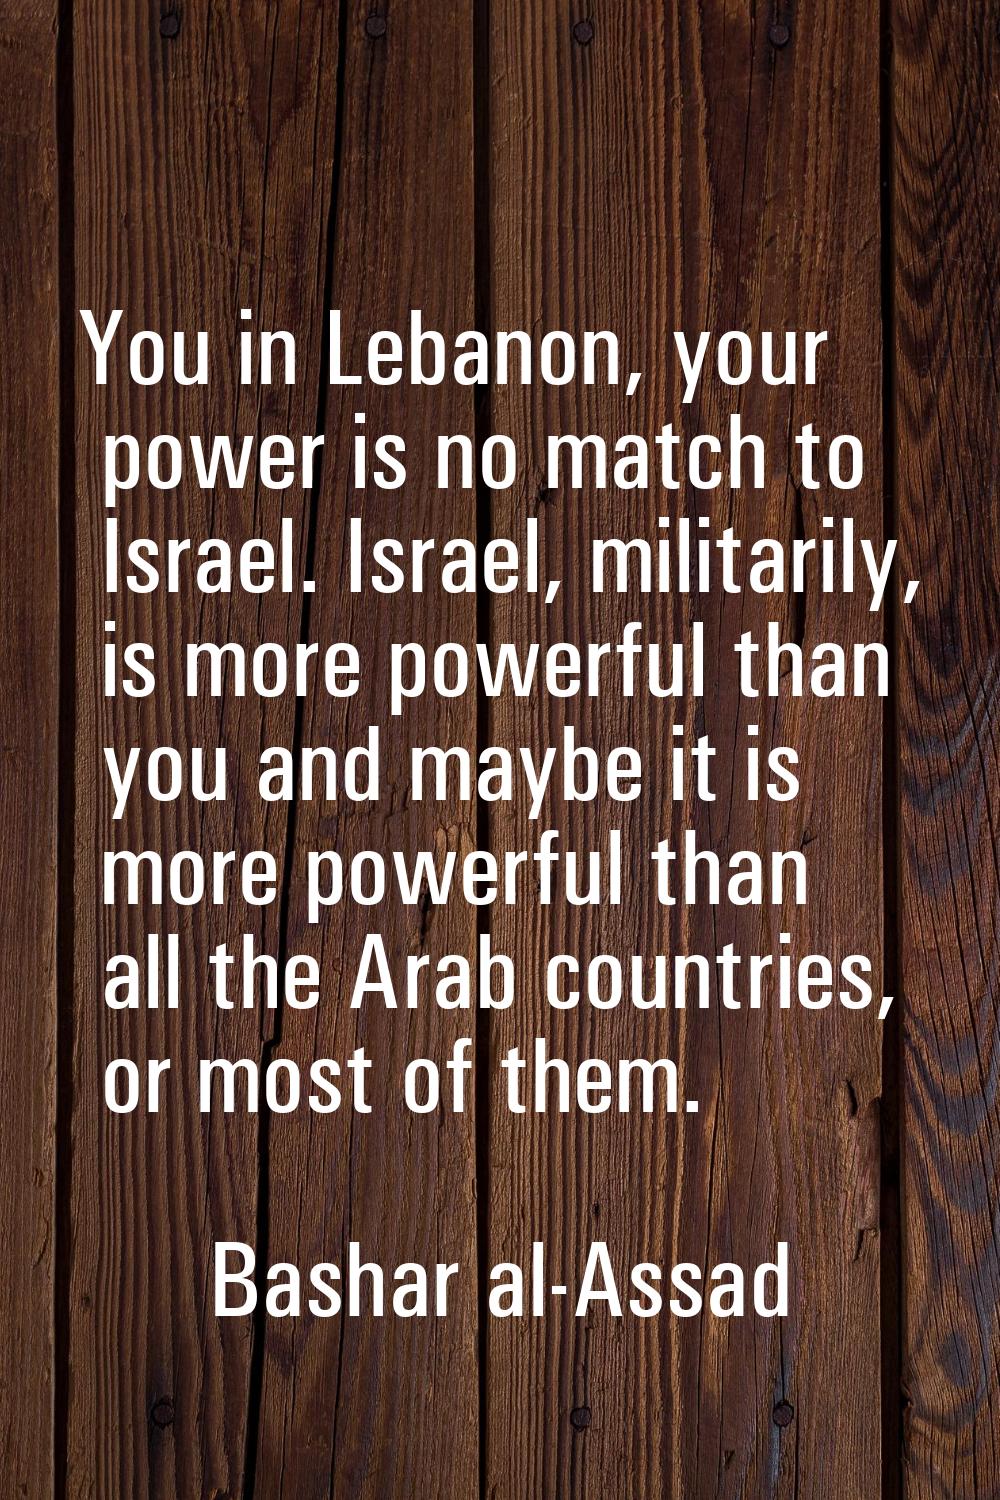 You in Lebanon, your power is no match to Israel. Israel, militarily, is more powerful than you and